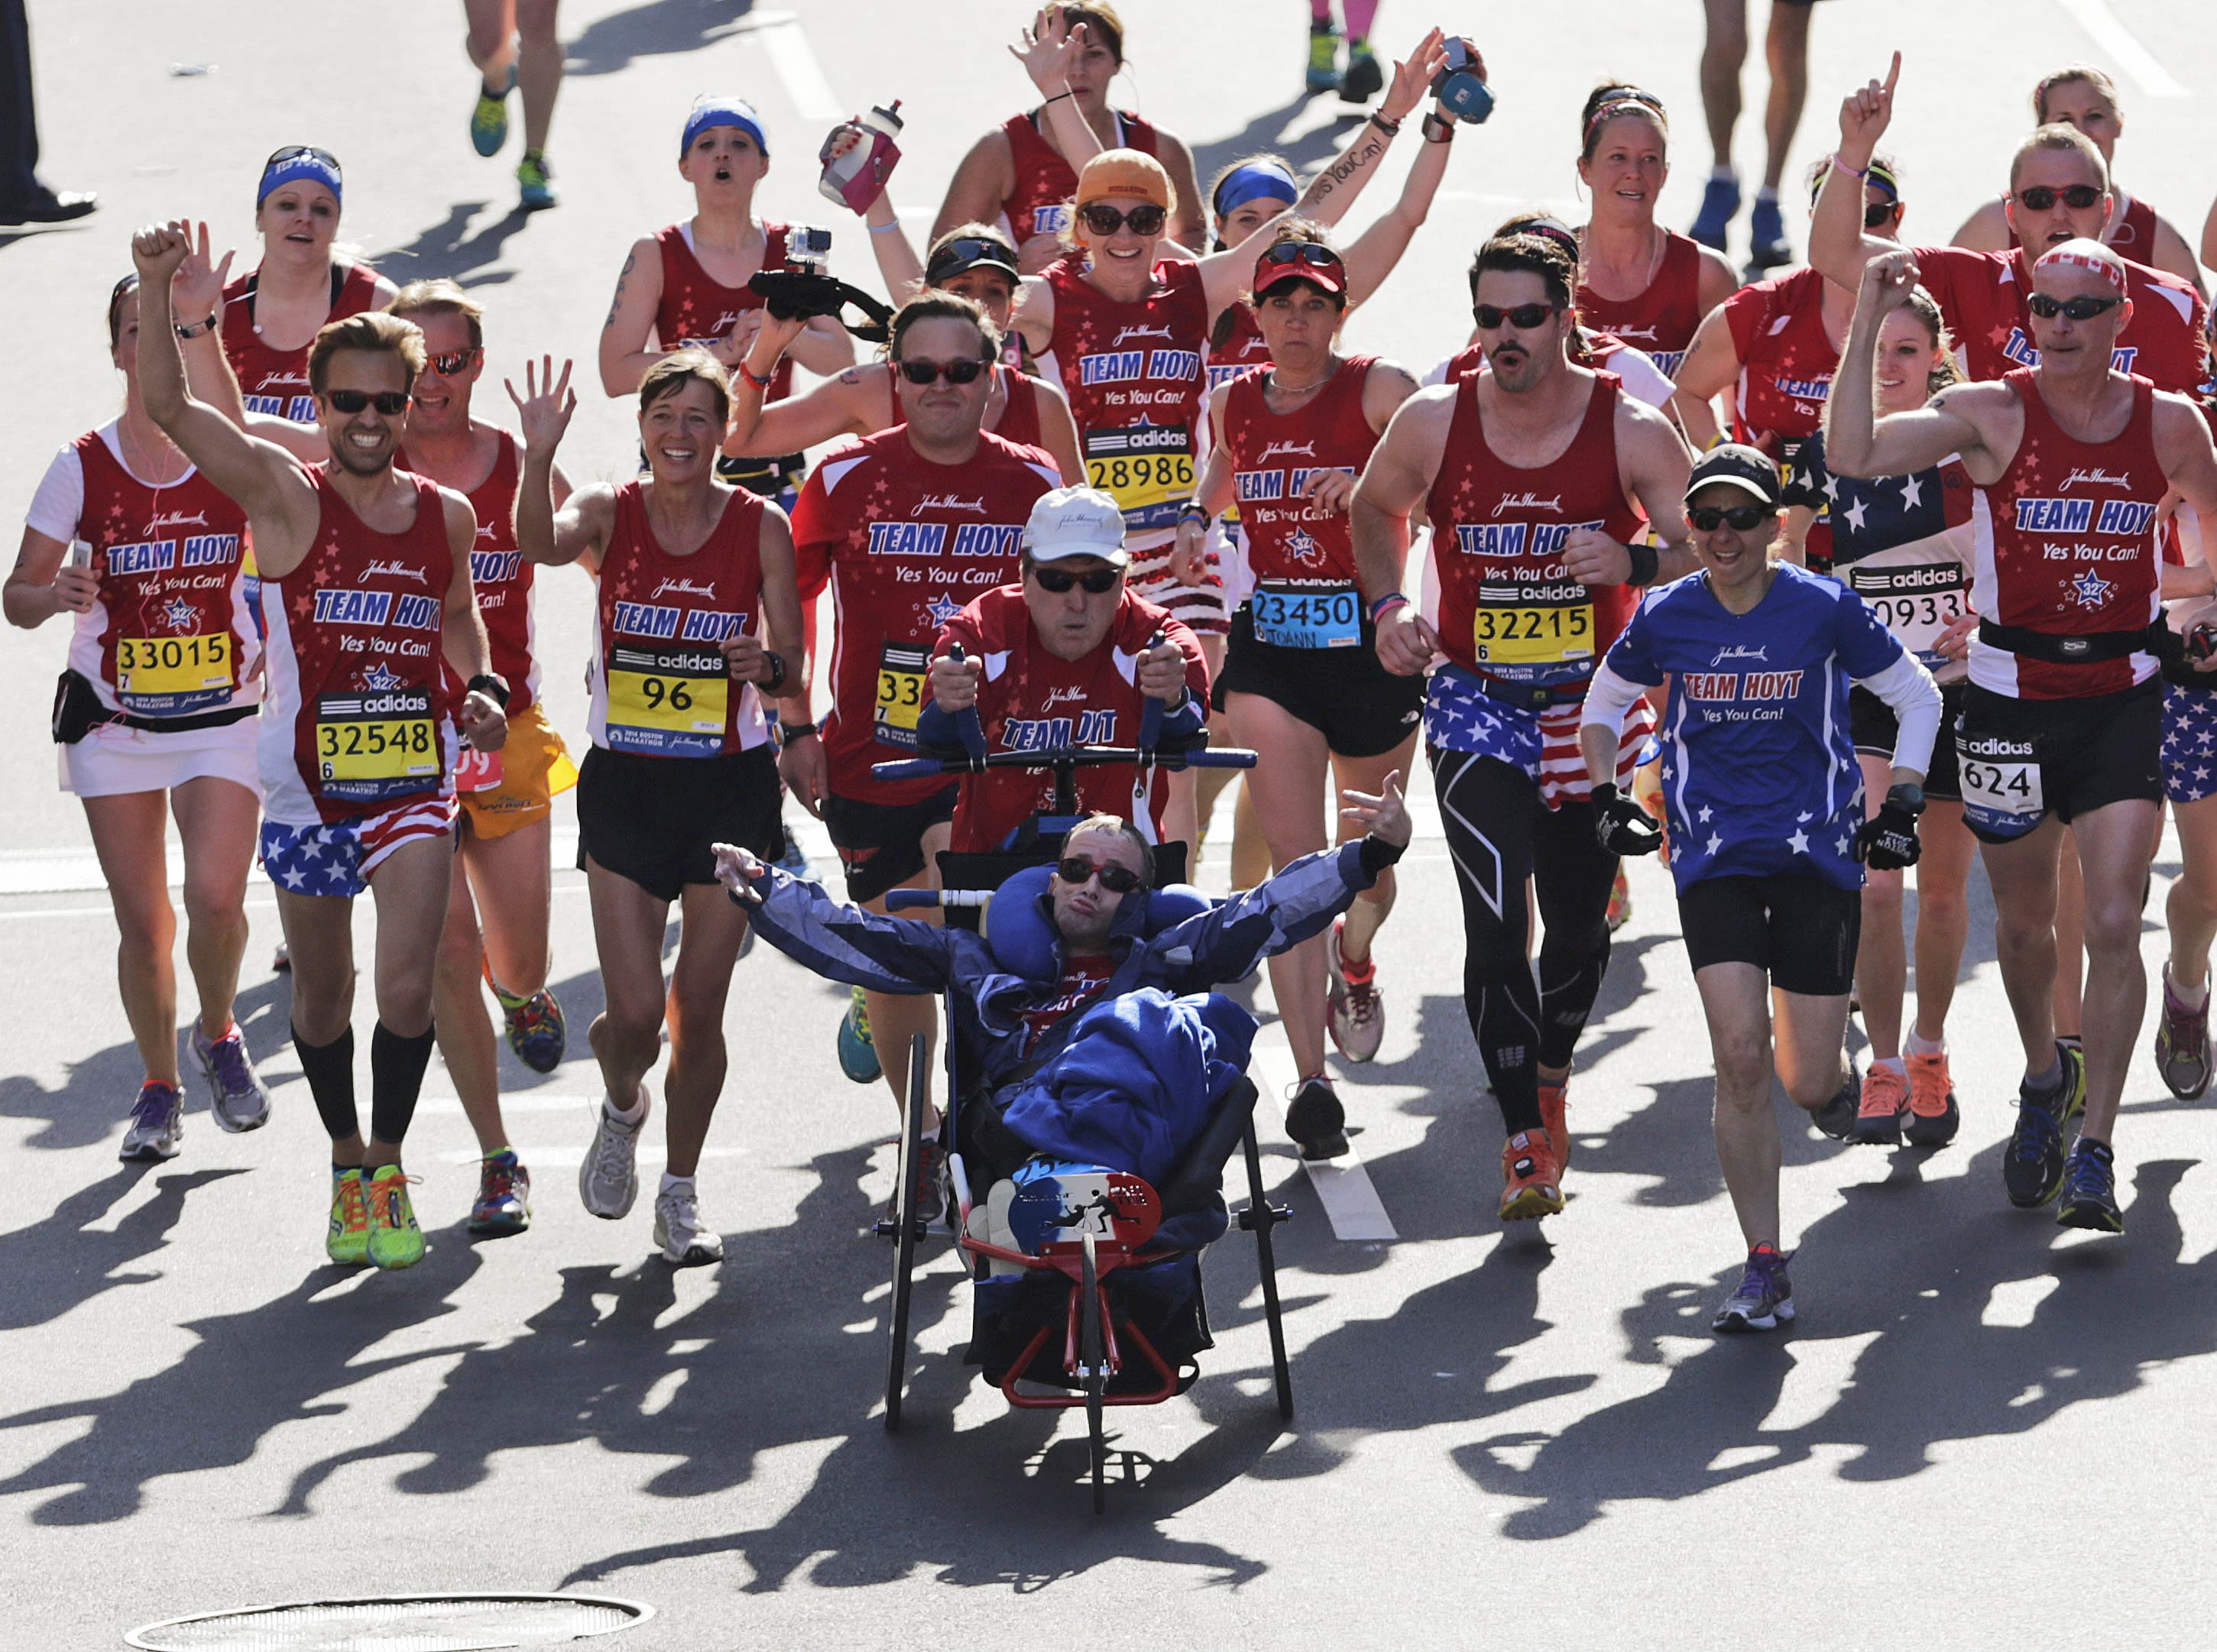 Dick and Rick Hoyt cross the finish line surrounded by supporters in the 118th Boston Marathon in Boston. (Charles Krupa/AP)